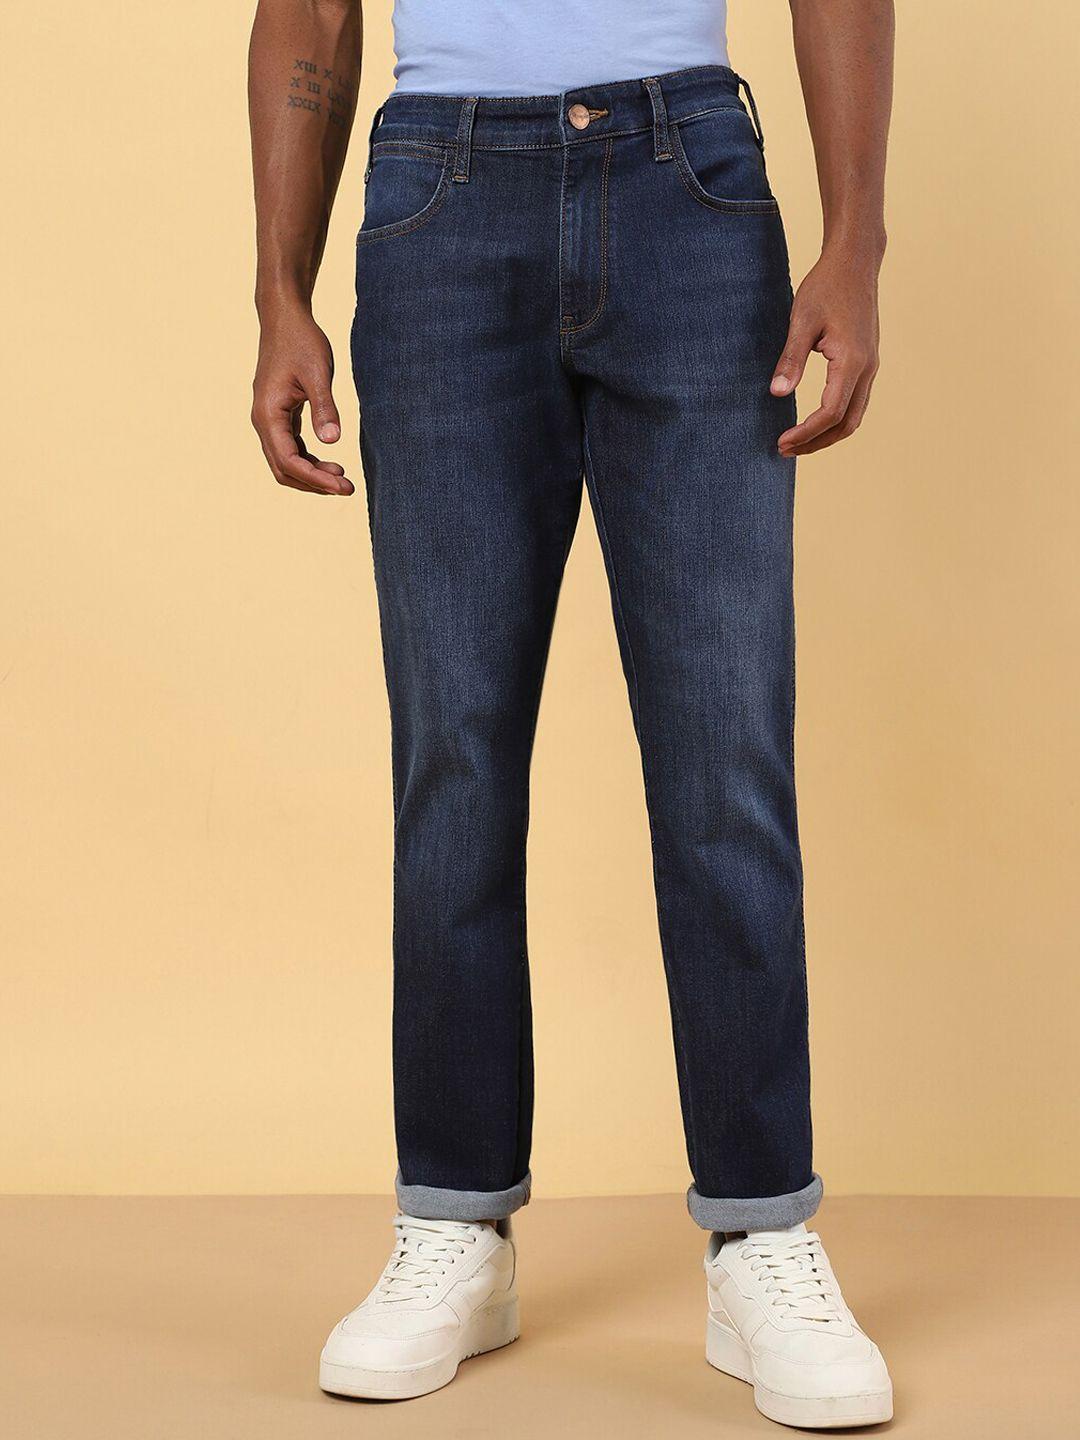 wrangler-men-millard-straight-fit-clean-look-light-fade-stretchable-jeans